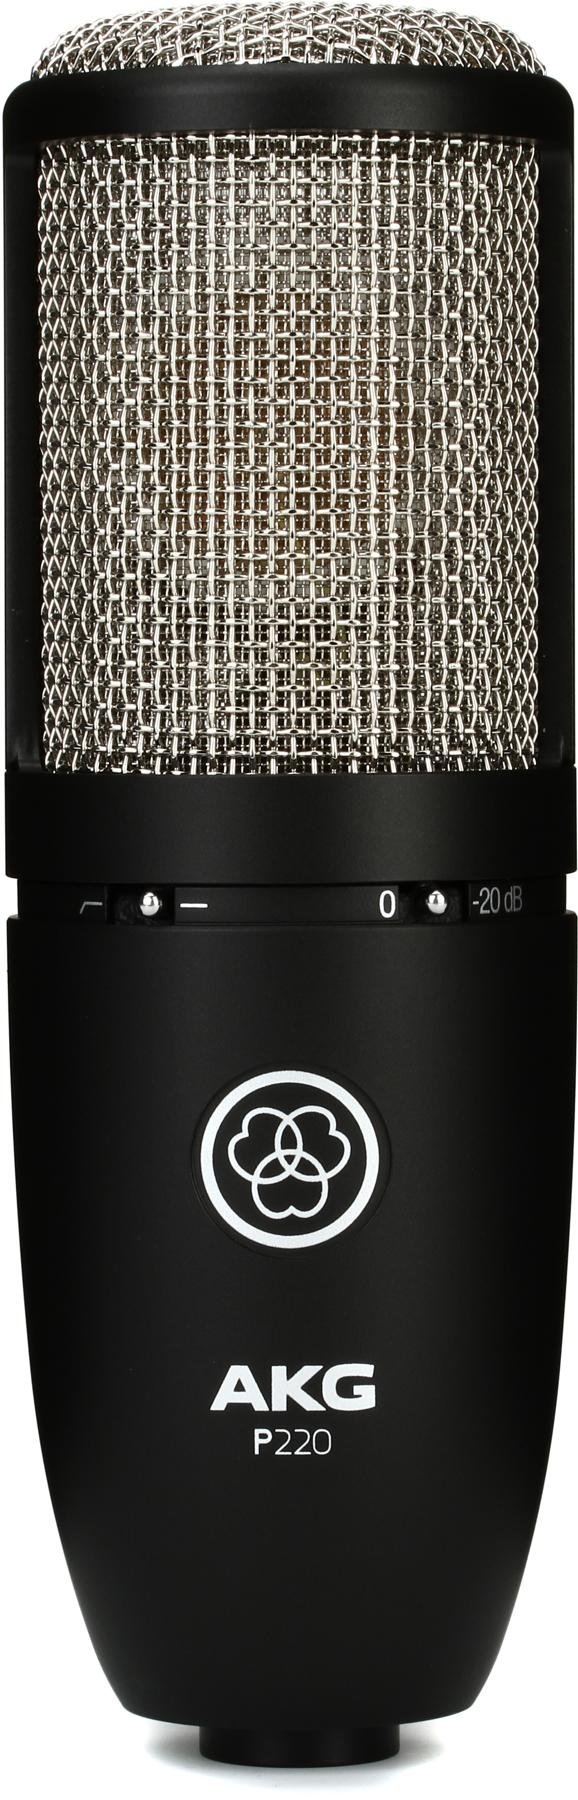 AKG P220 Large-diaphragm Condenser Microphone | Sweetwater